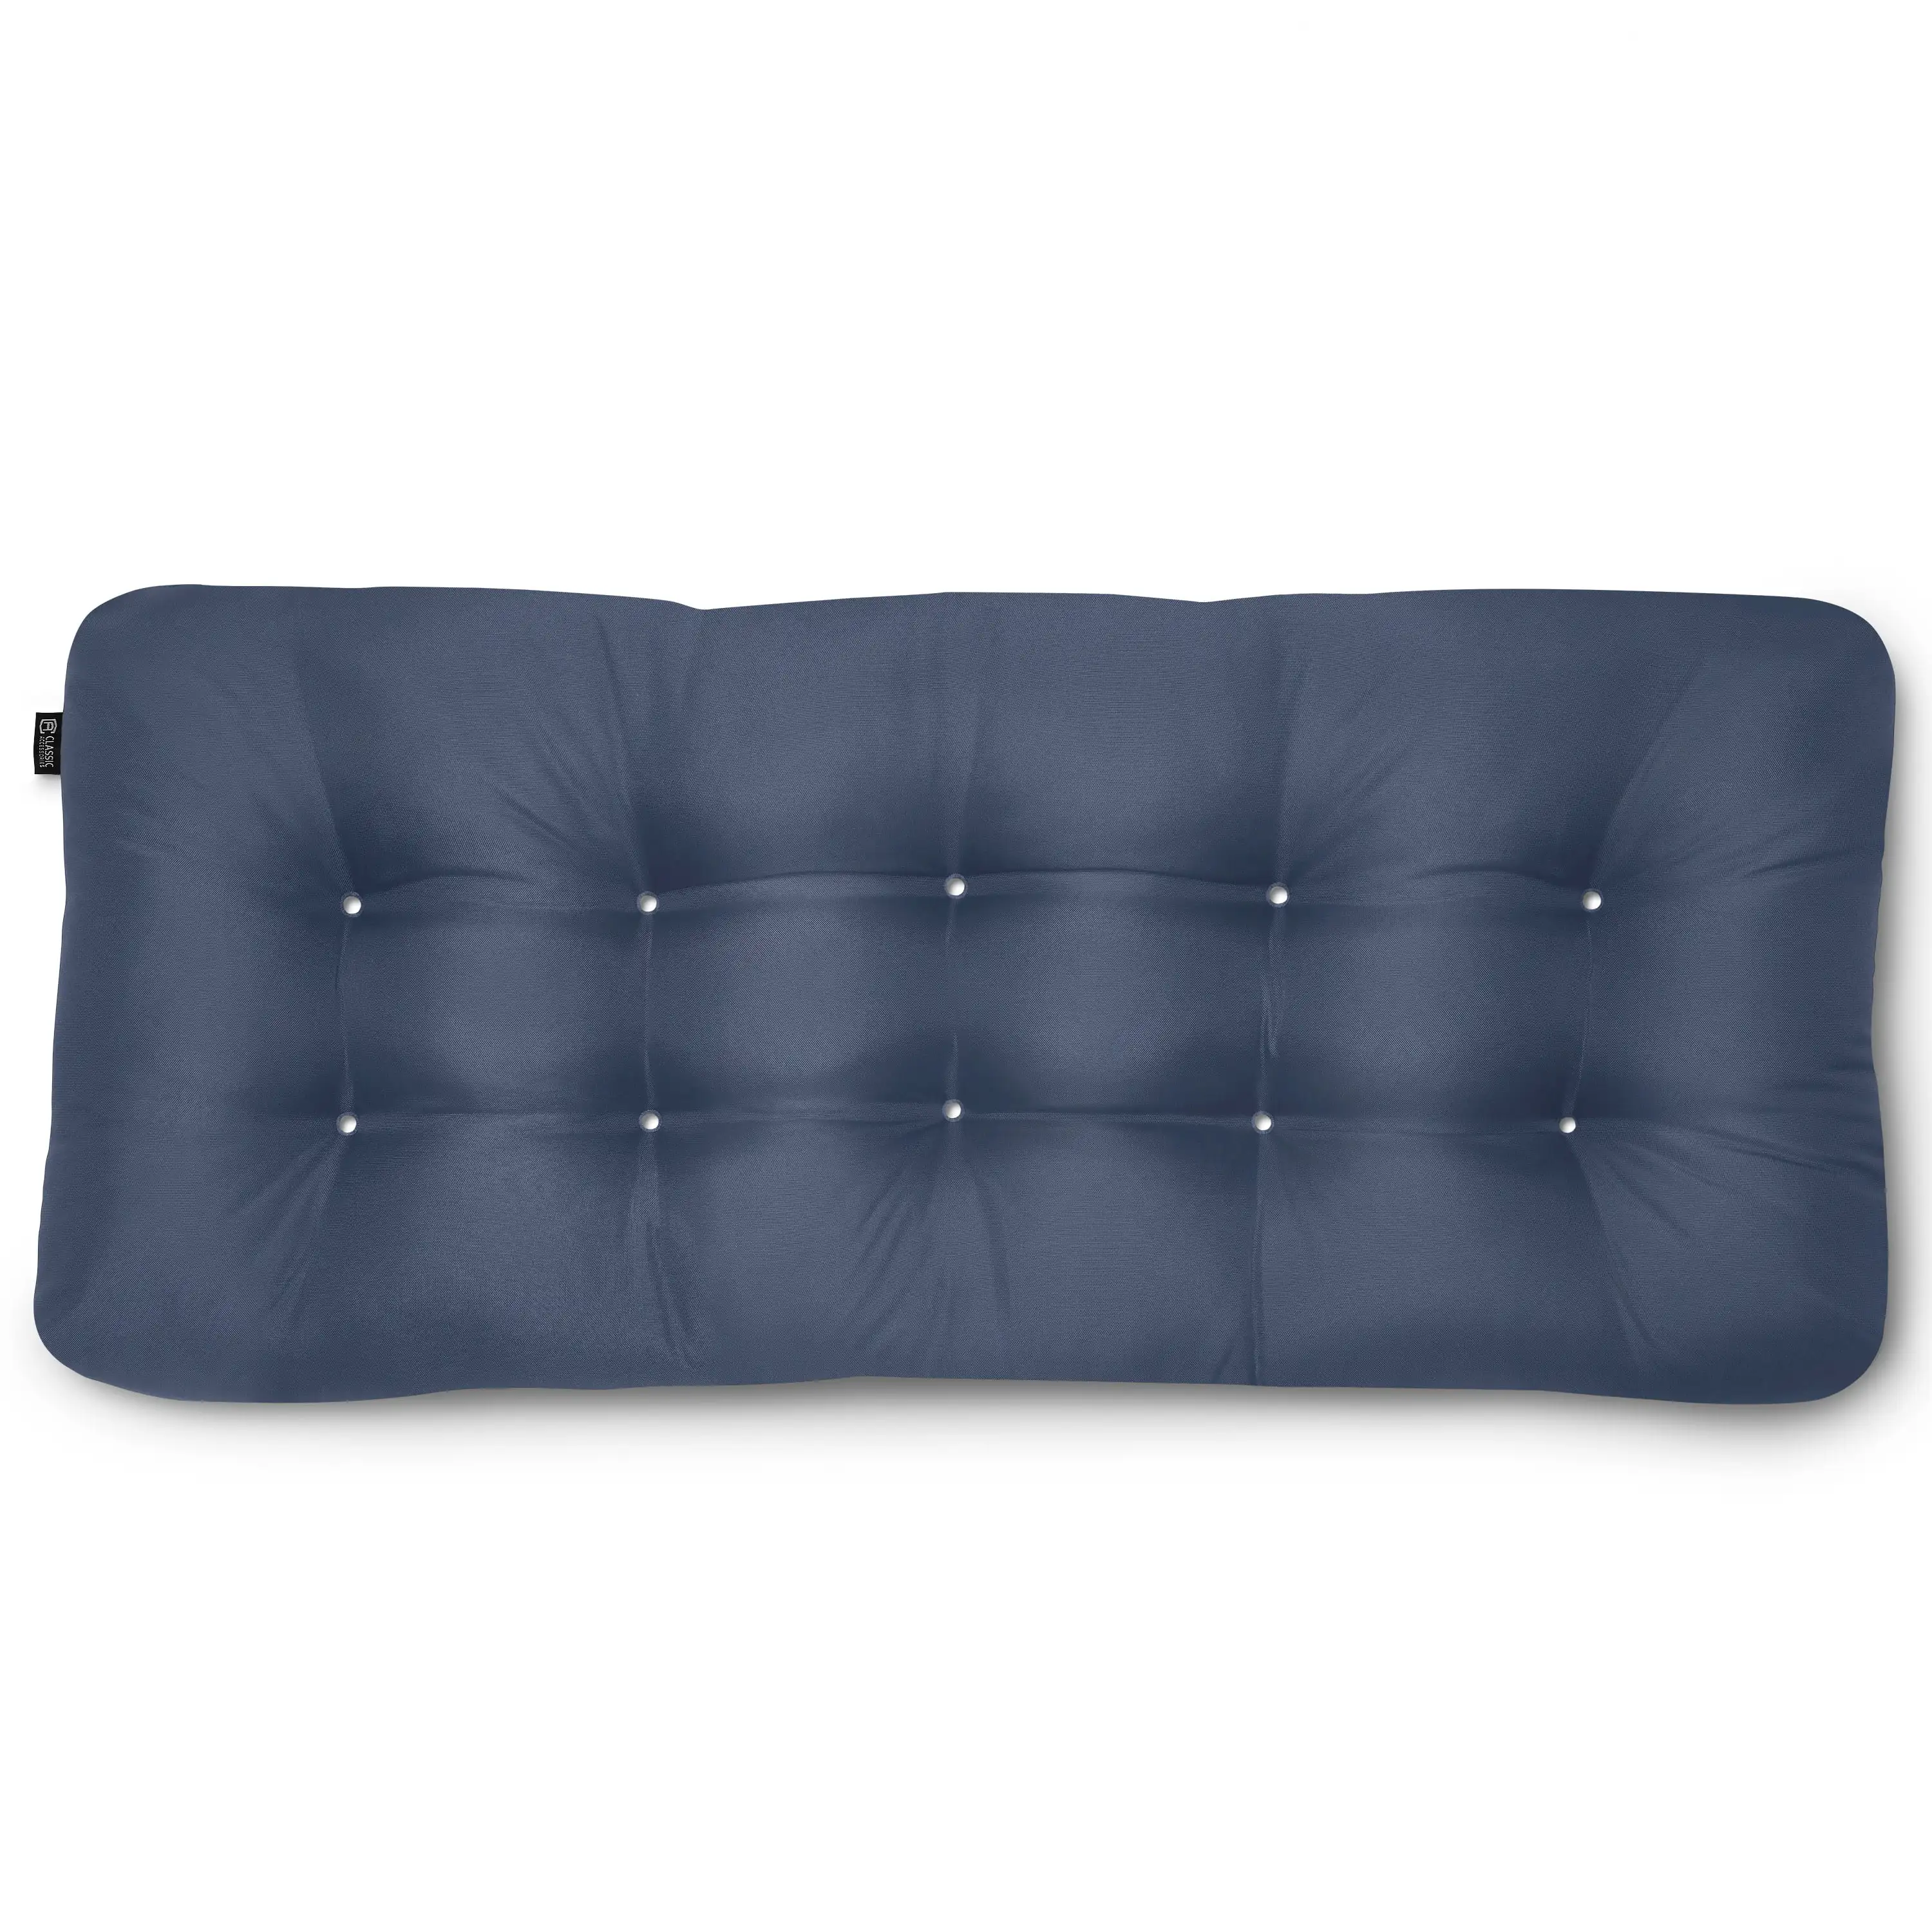 

Classic Accessories 18" x 42" Navy Rectangle Bench Outdoor Seating Cushion with Water Resistant Fabric